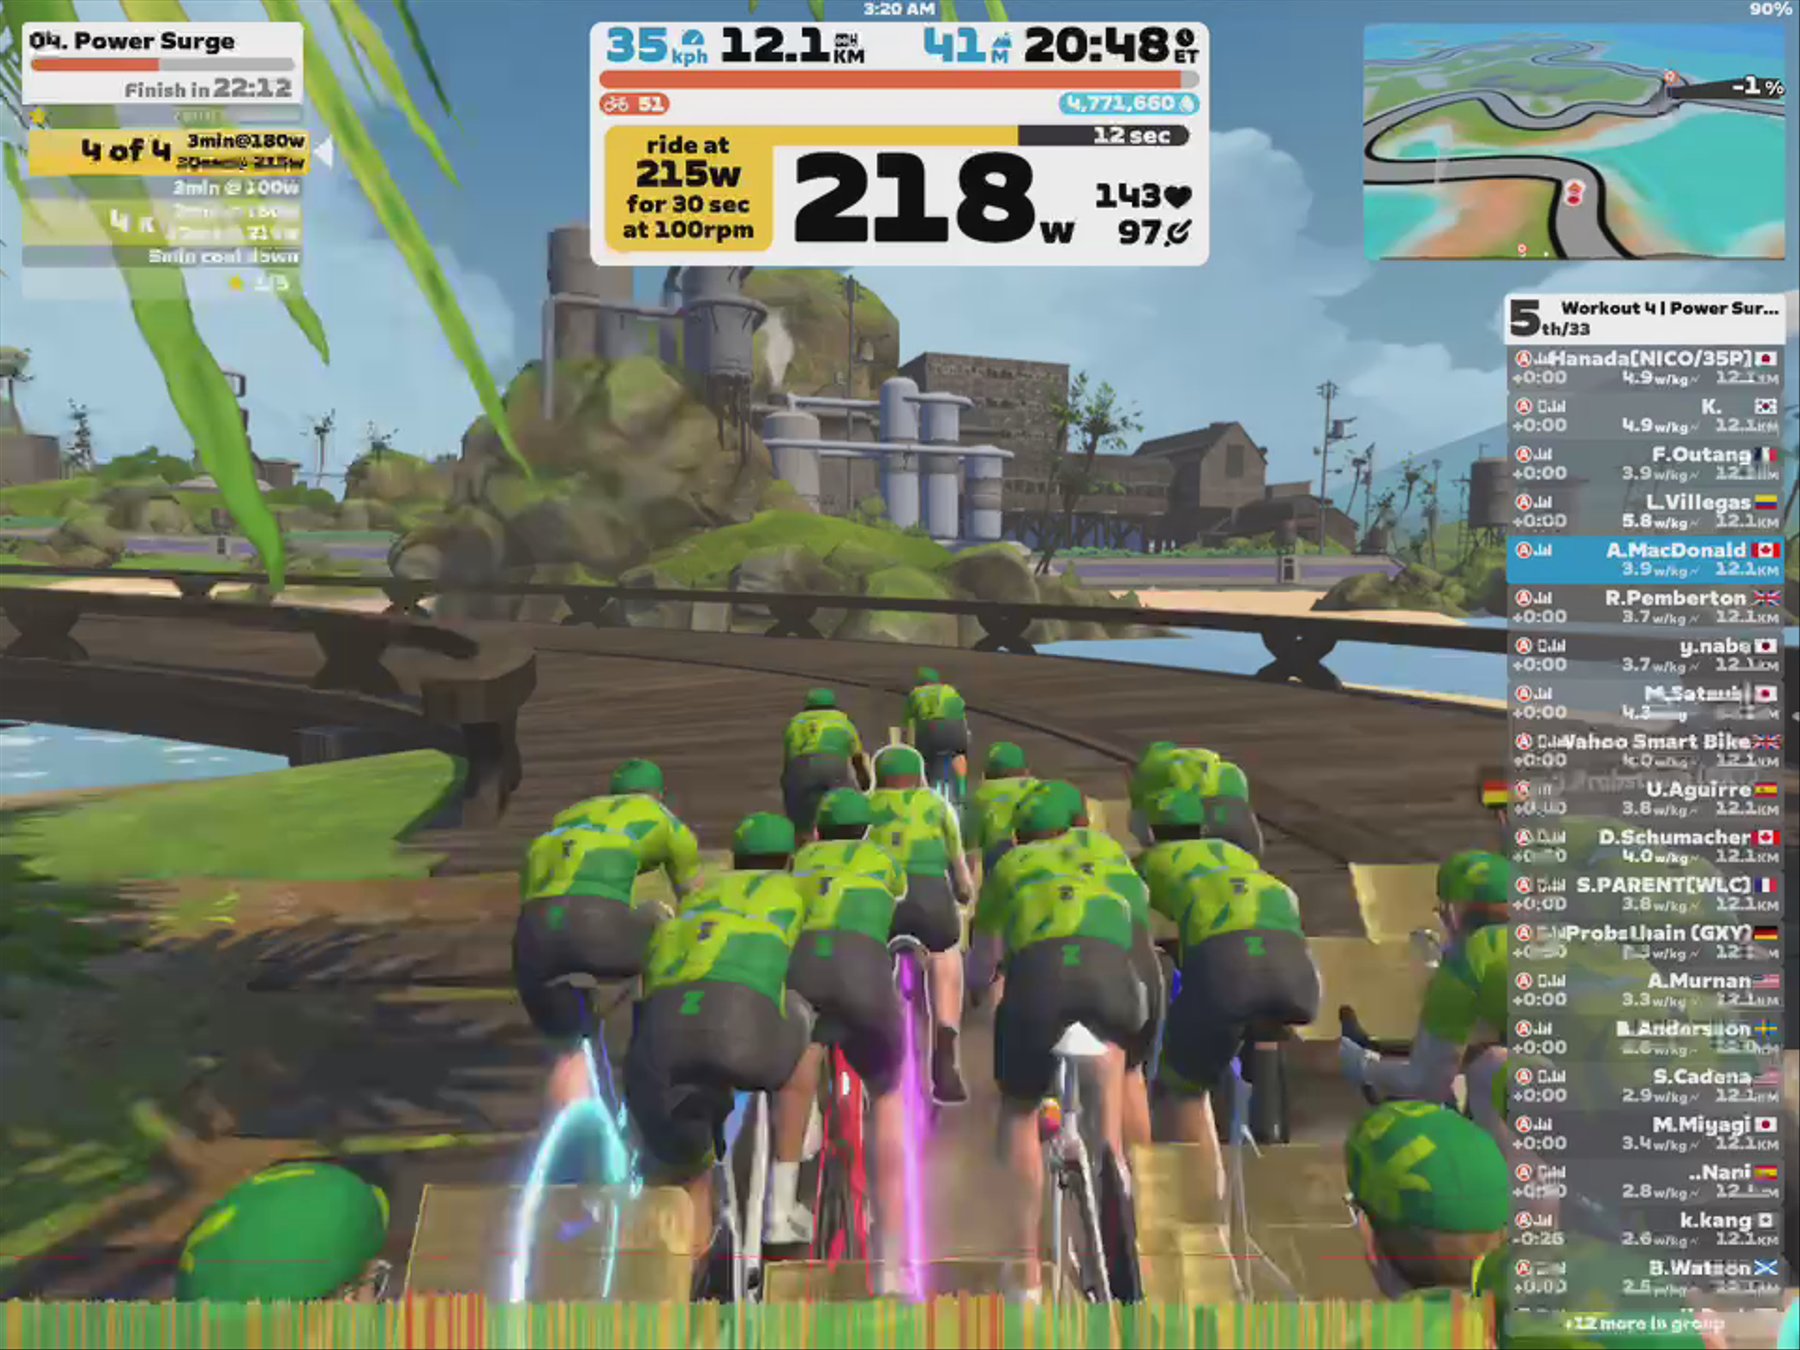 Zwift - Group Workout: Long - Power Surge  on Turf N Surf in Makuri Islands